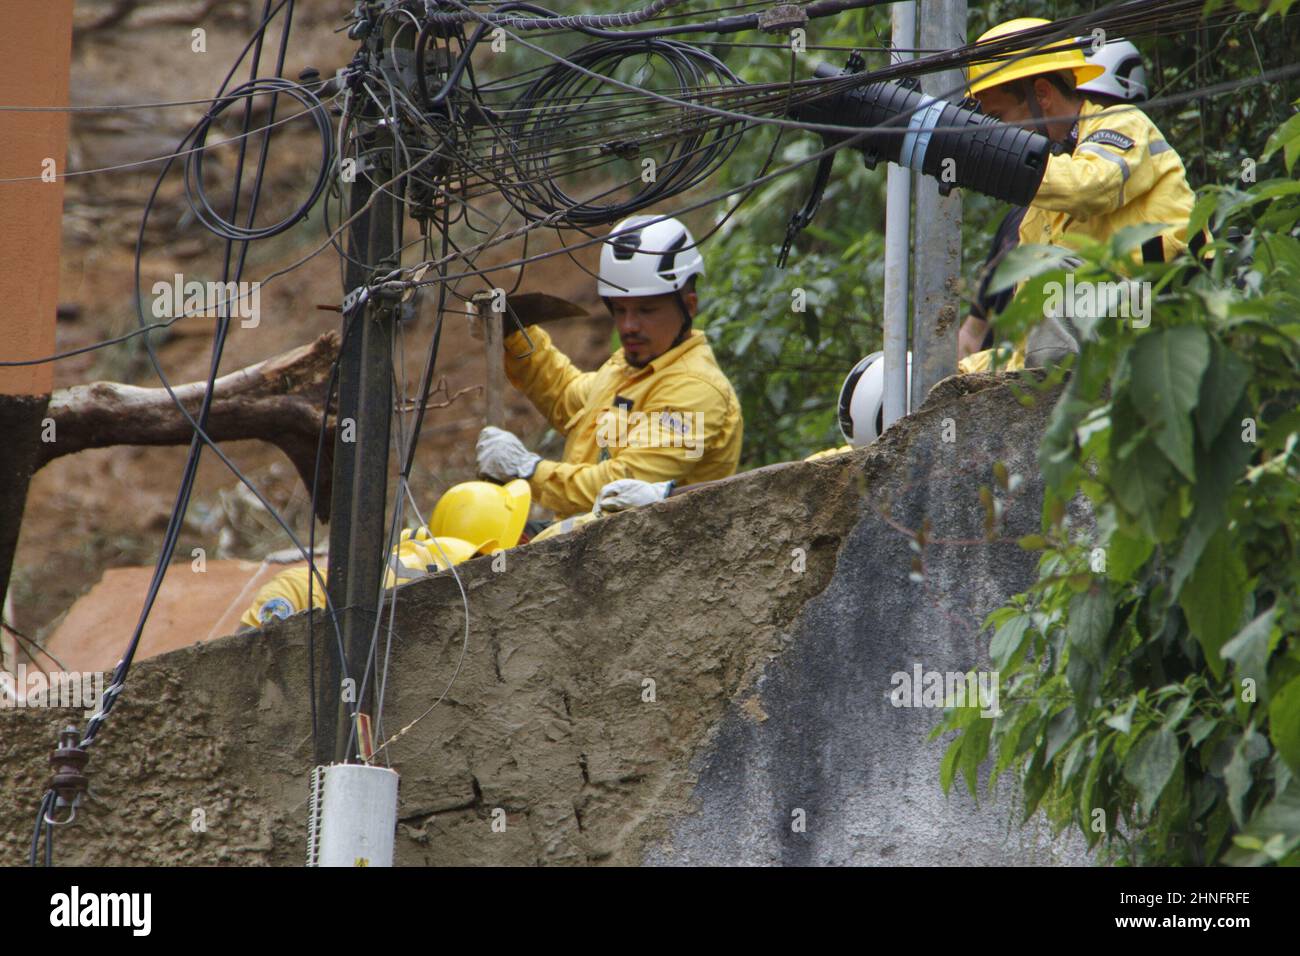 Rio de Janeiro, Rio de Janeiro, Brasil. 16th Feb, 2022. (INT) Damage in Petropolis after flooding hits the city and leaves at least 80 dead. February 16, 2022, Petropolis, Rio de Janeiro, Brazil: View of the damage caused by the flood in Petropolis, in the mountainous region of Rio de Janeiro, on Wednesday (16), after the city was hit by a storm yesterday afternoon (15). At least 80 people died as a result of the landslides and floods that hit the city, as informed by the Civil Defense. Several points in the center are blocked and public school classes have been suspended. The Petropolis Ci Stock Photo